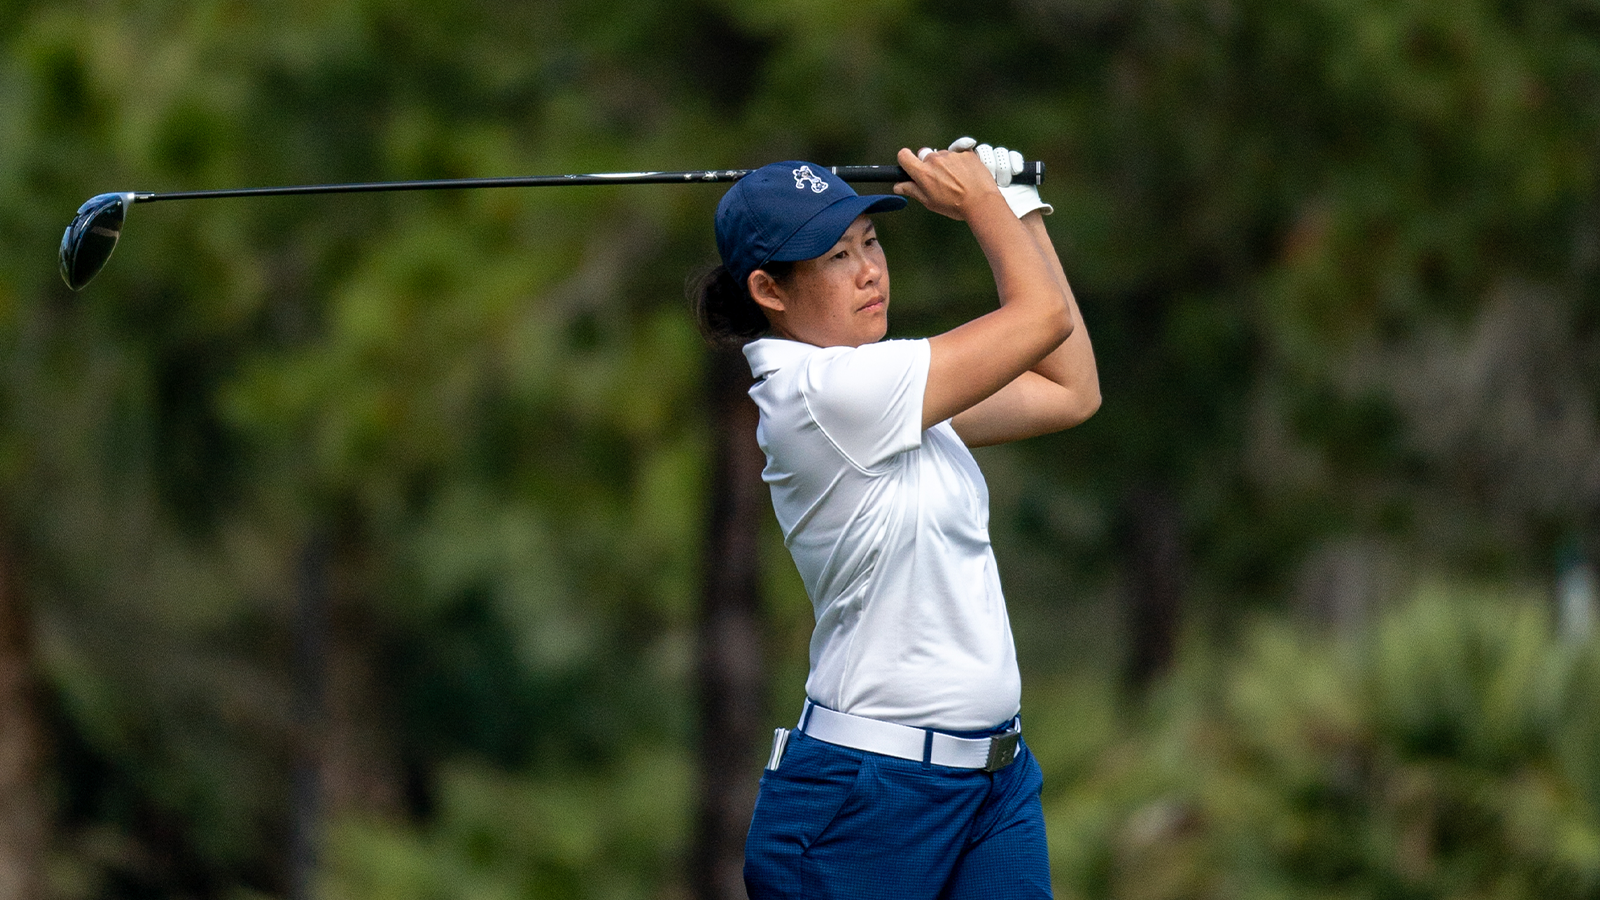 Sandra Changkija tees off on the second hole of the Wanamaker Course during the final round of the 2021 Women's Stroke Play Championship at PGA Golf Club on February 16, 2021 in Port St. Lucie, Florida. (Photo by Rachel Harris/PGA of America)